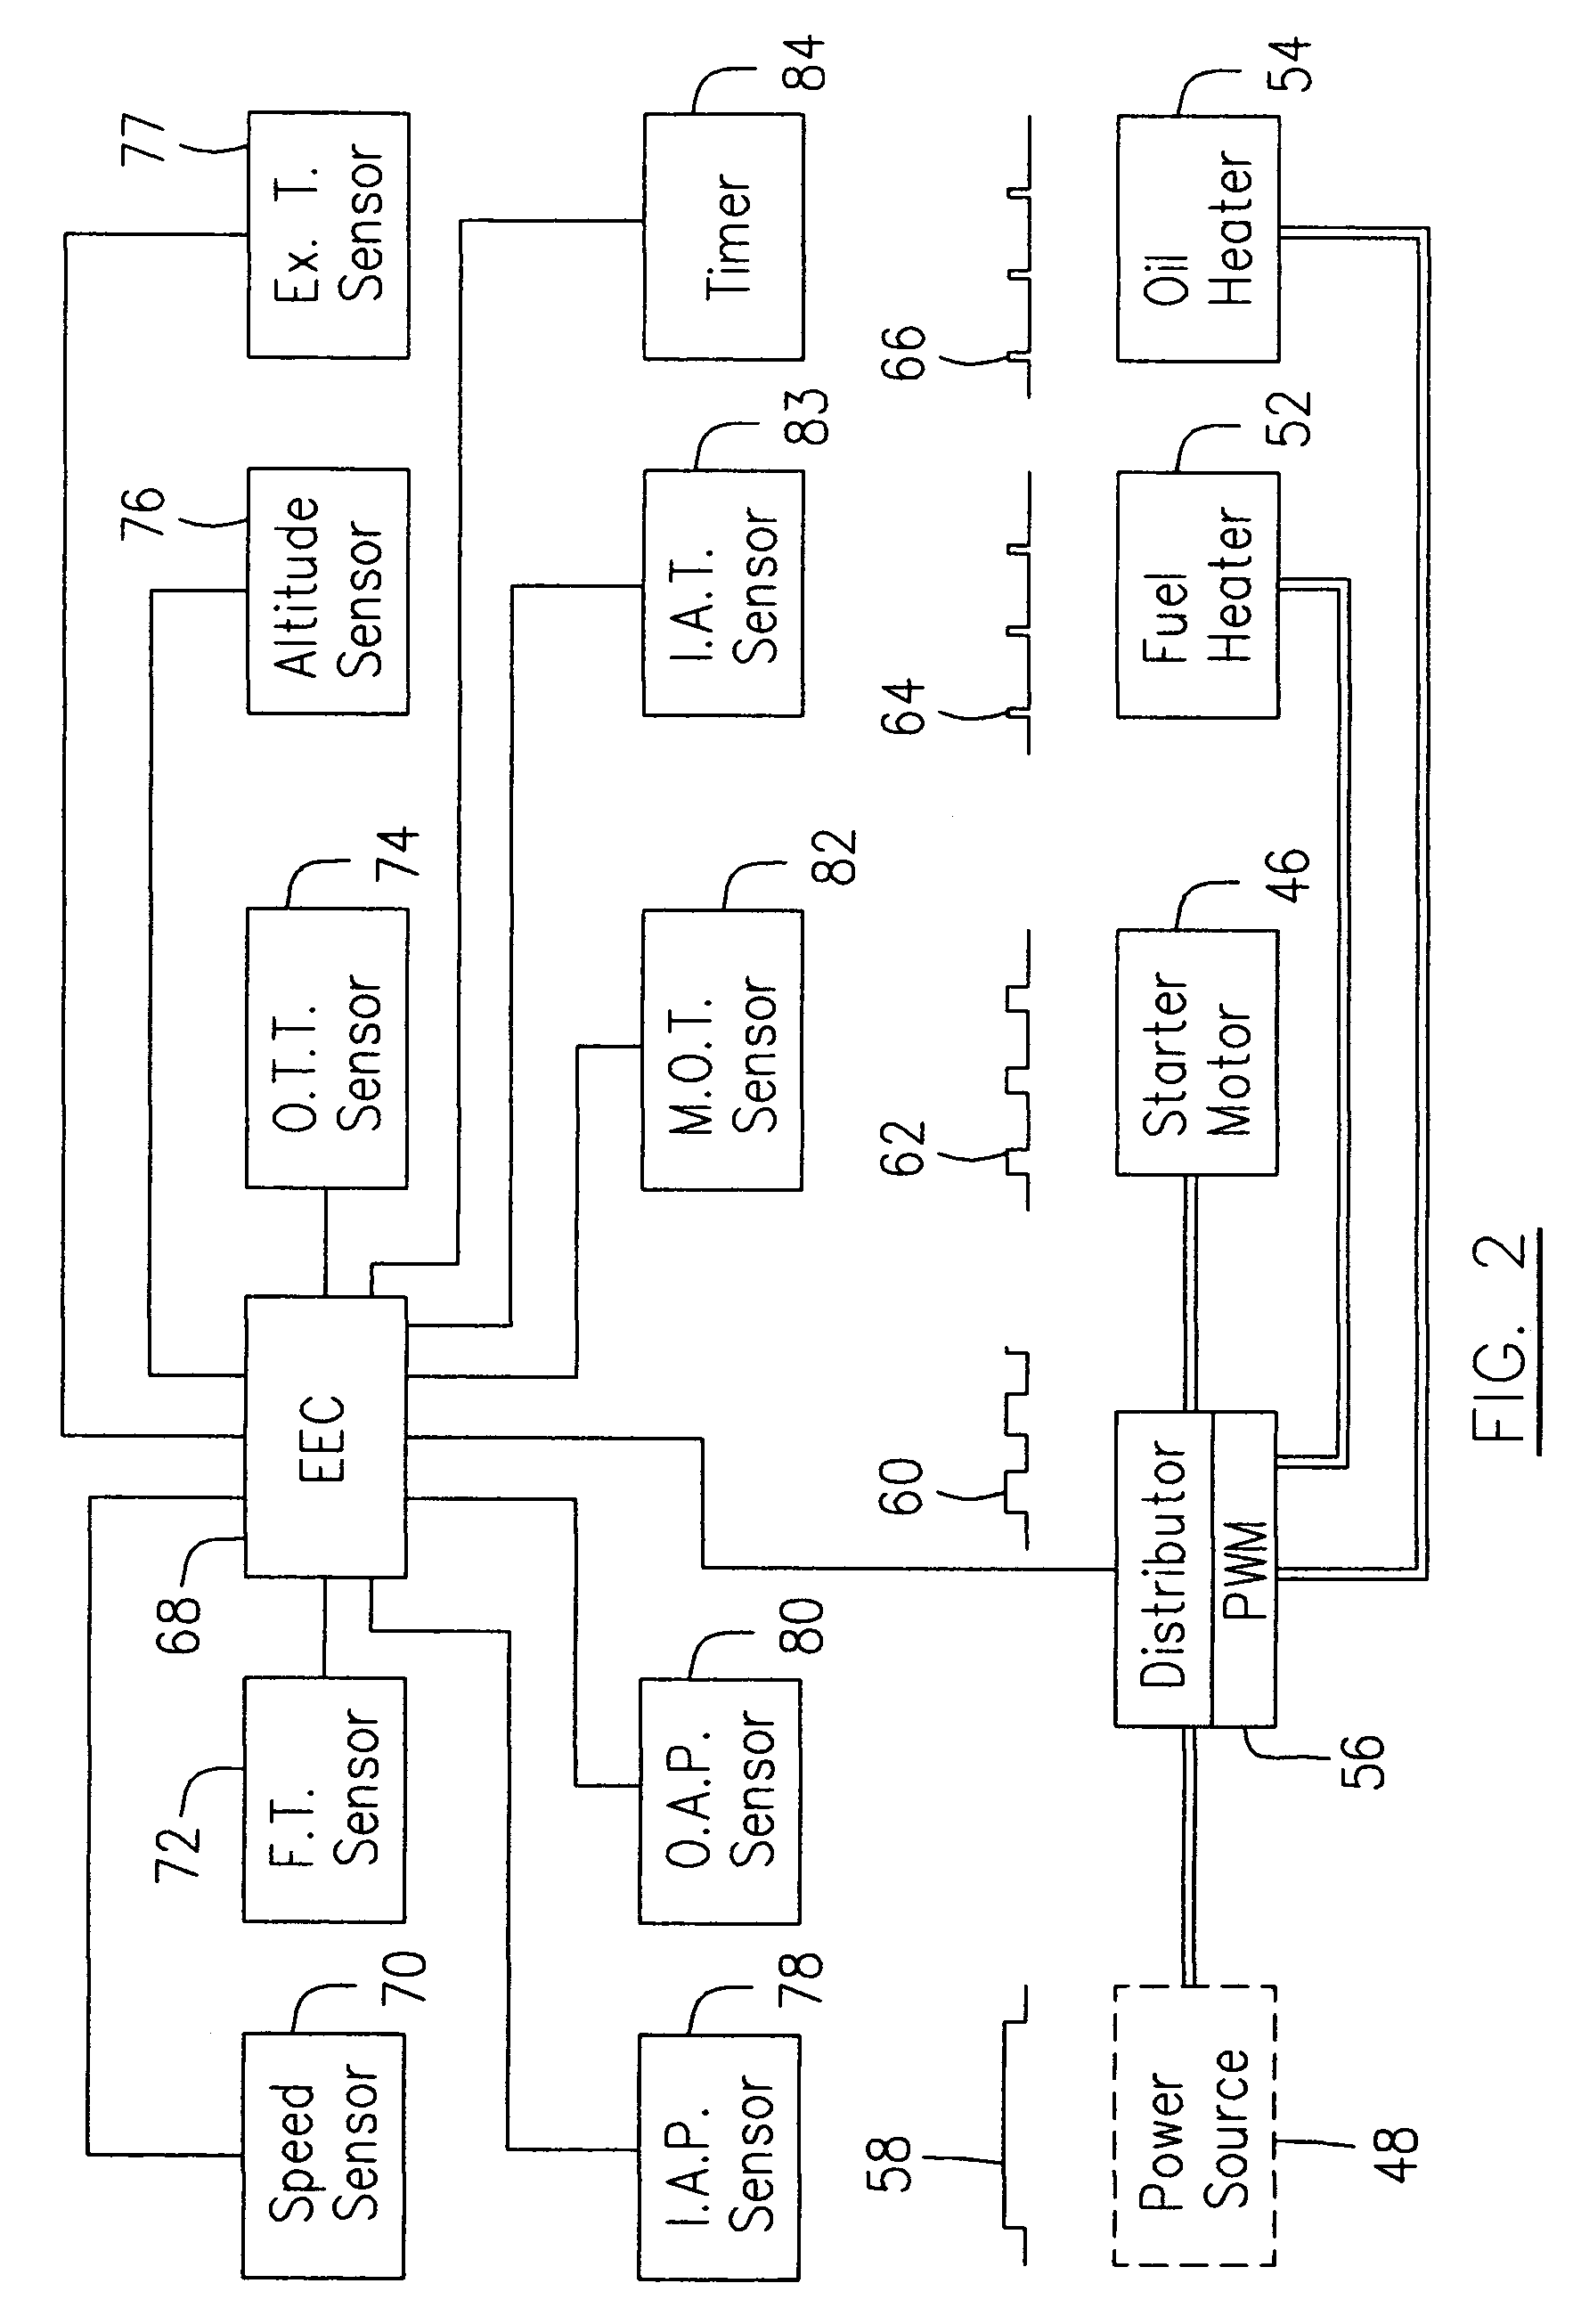 Modulated current gas turbine engine starting system